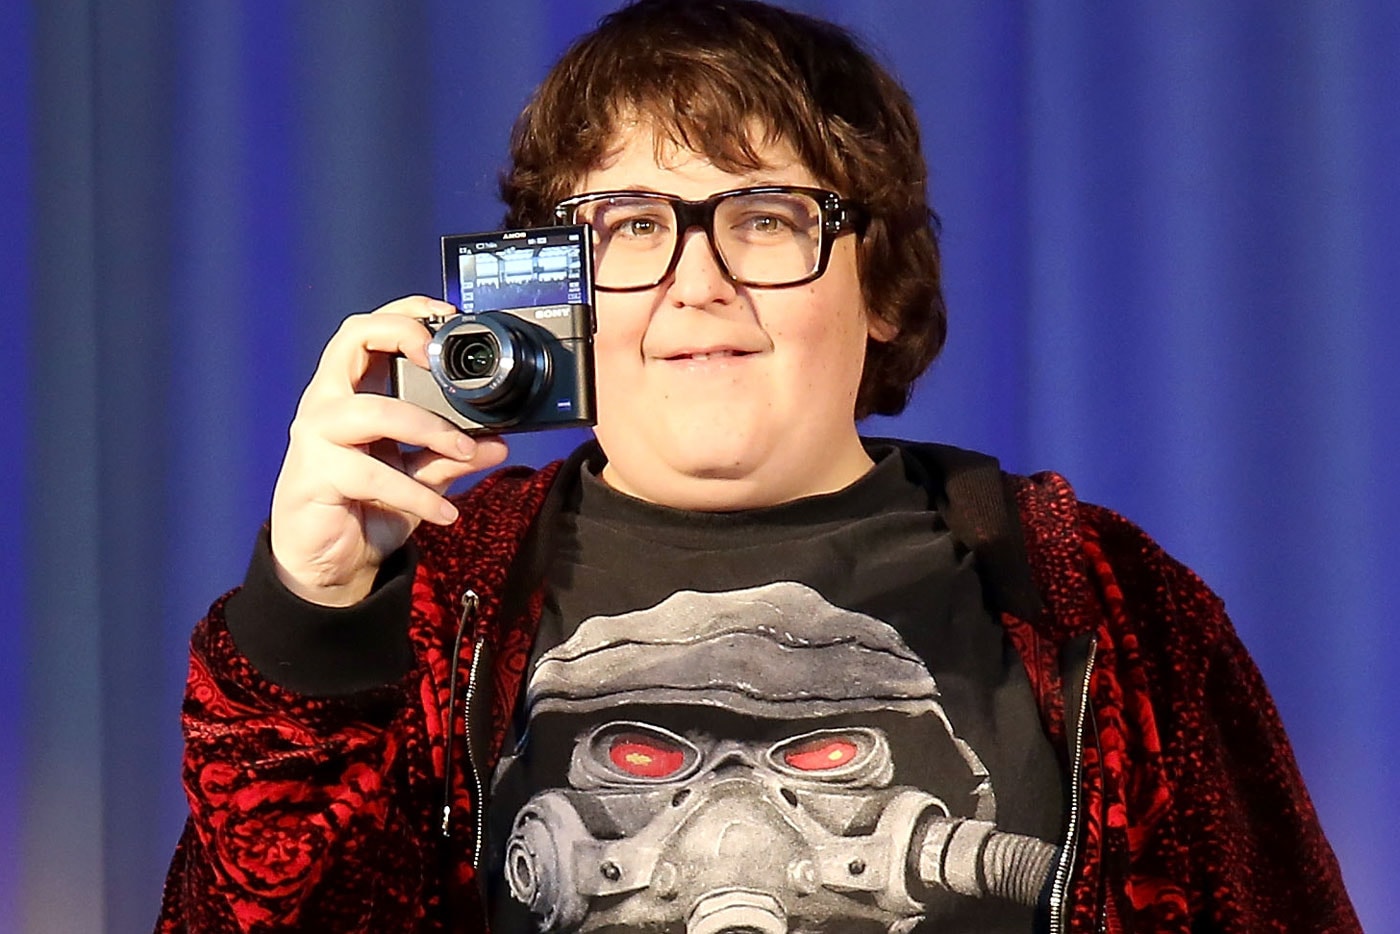 Andy Milonakis Dropped a Track Entitled "Suck Me Off To Drake Songs"